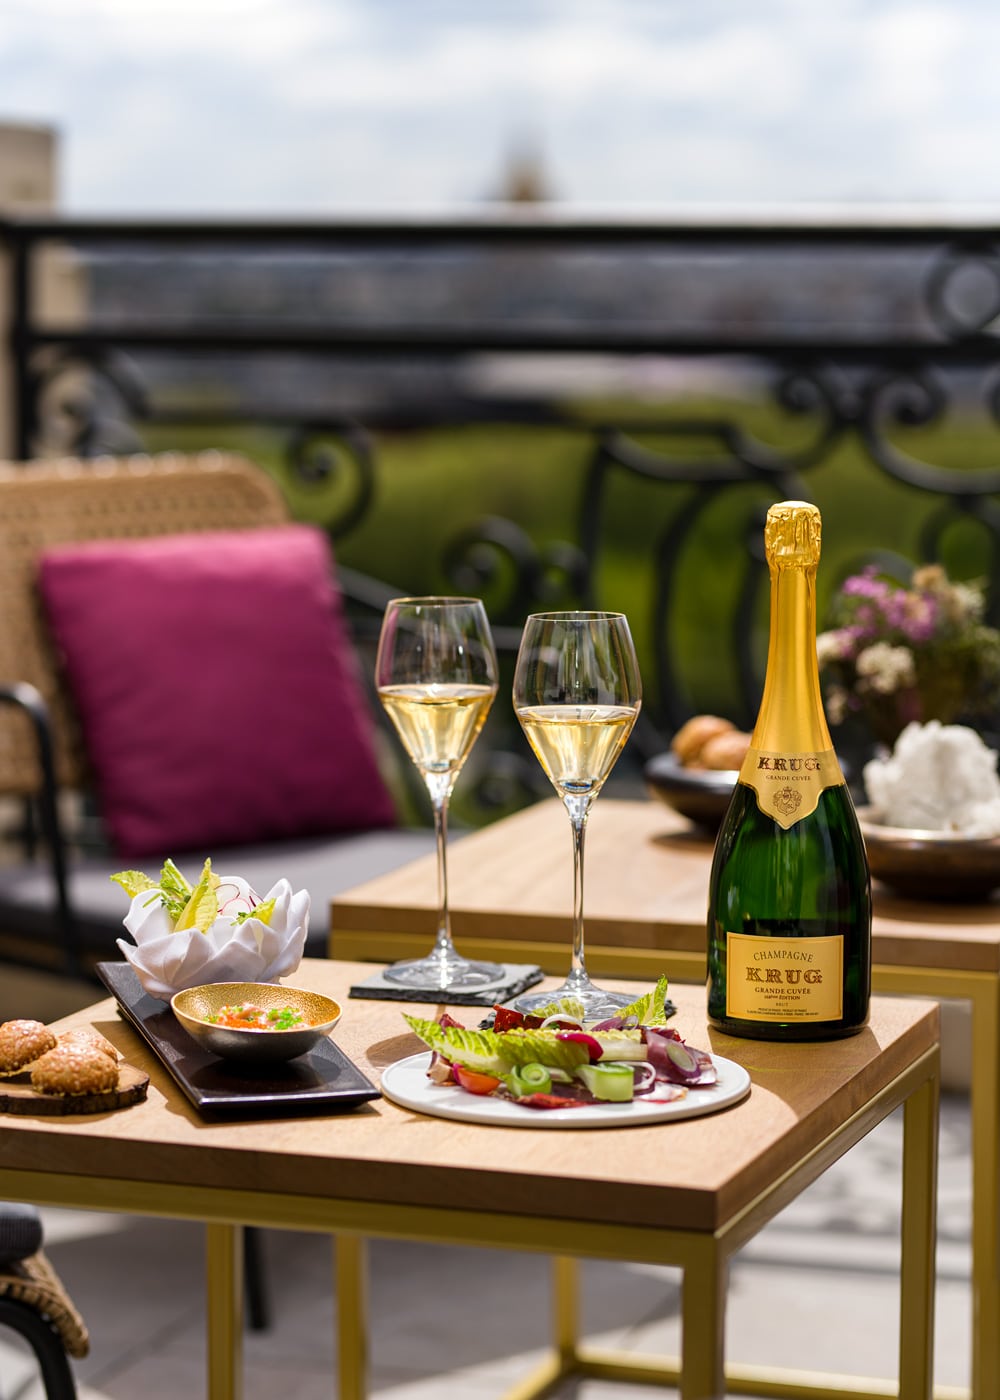 Krug, exceptional champagne - Wines & Spirits - LVMH